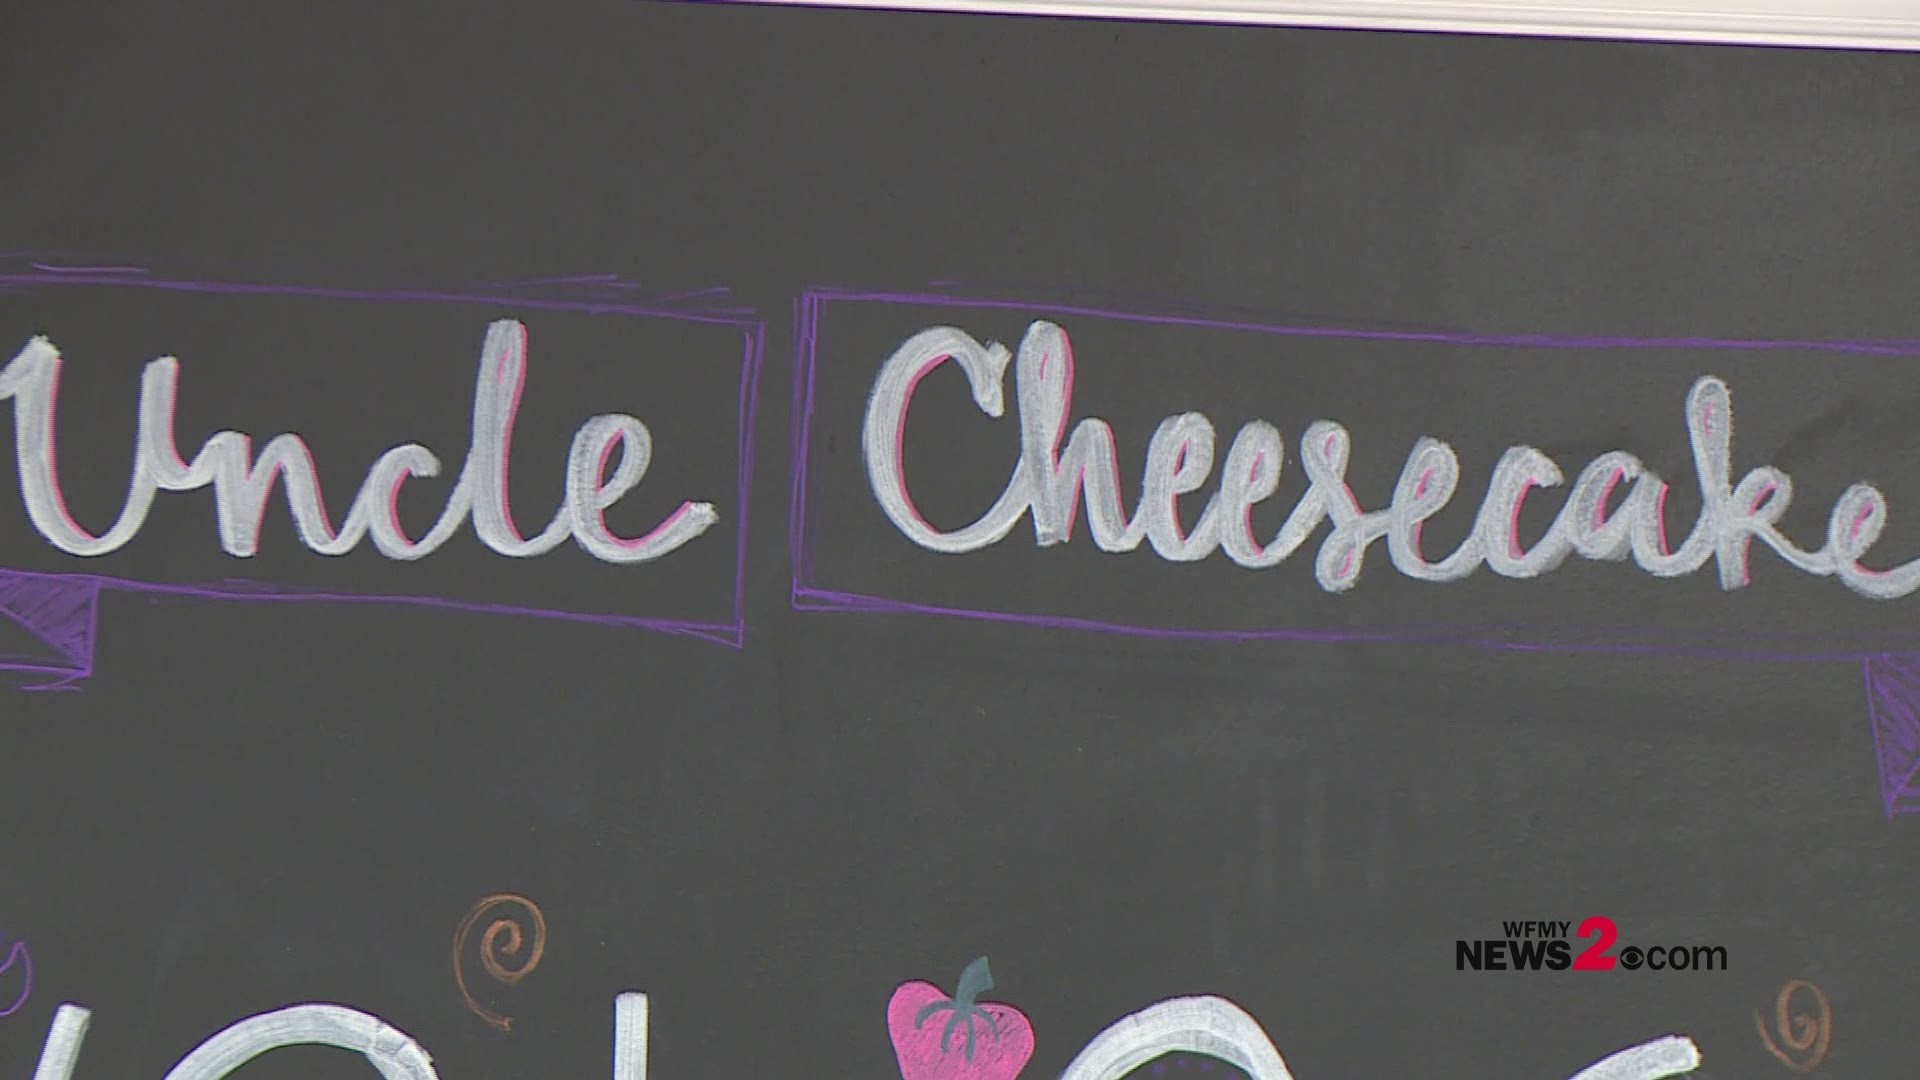 Daniel Gray, a Greensboro firefighter with skills in the kitchen, just opened his own "Uncle Cheesecake" shop in High Point. Last year, Gray showed off his hidden talent when he competed on the Food Network show "Chopped."